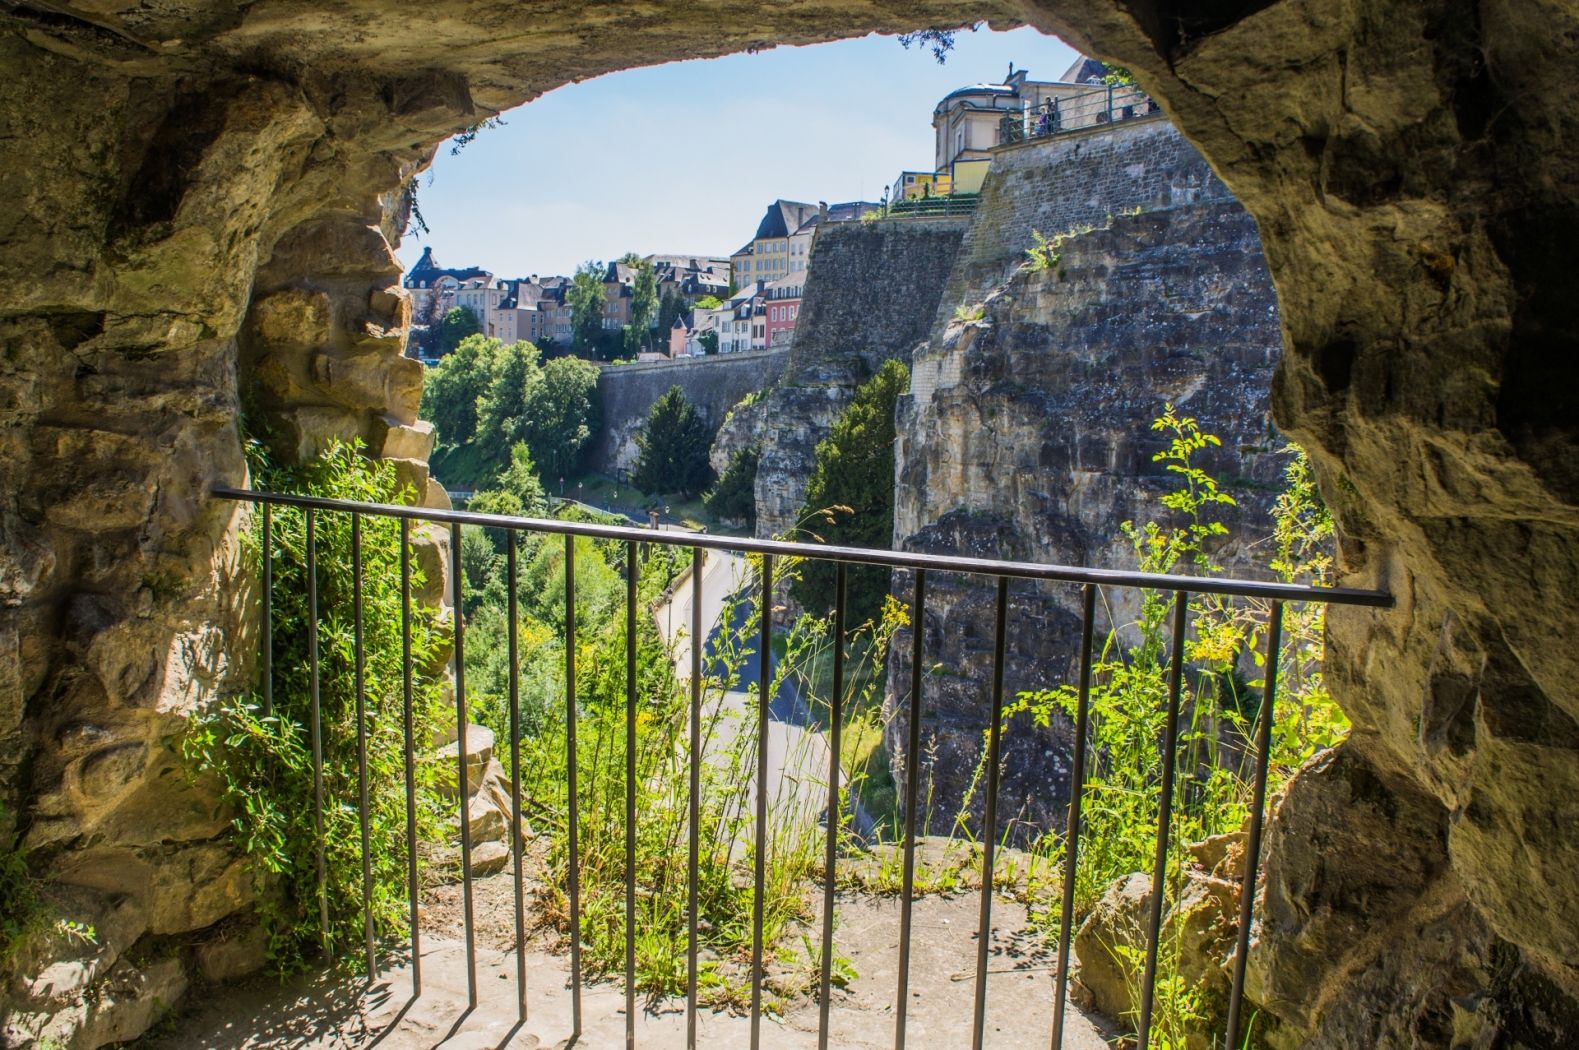 View from the Bock casemates